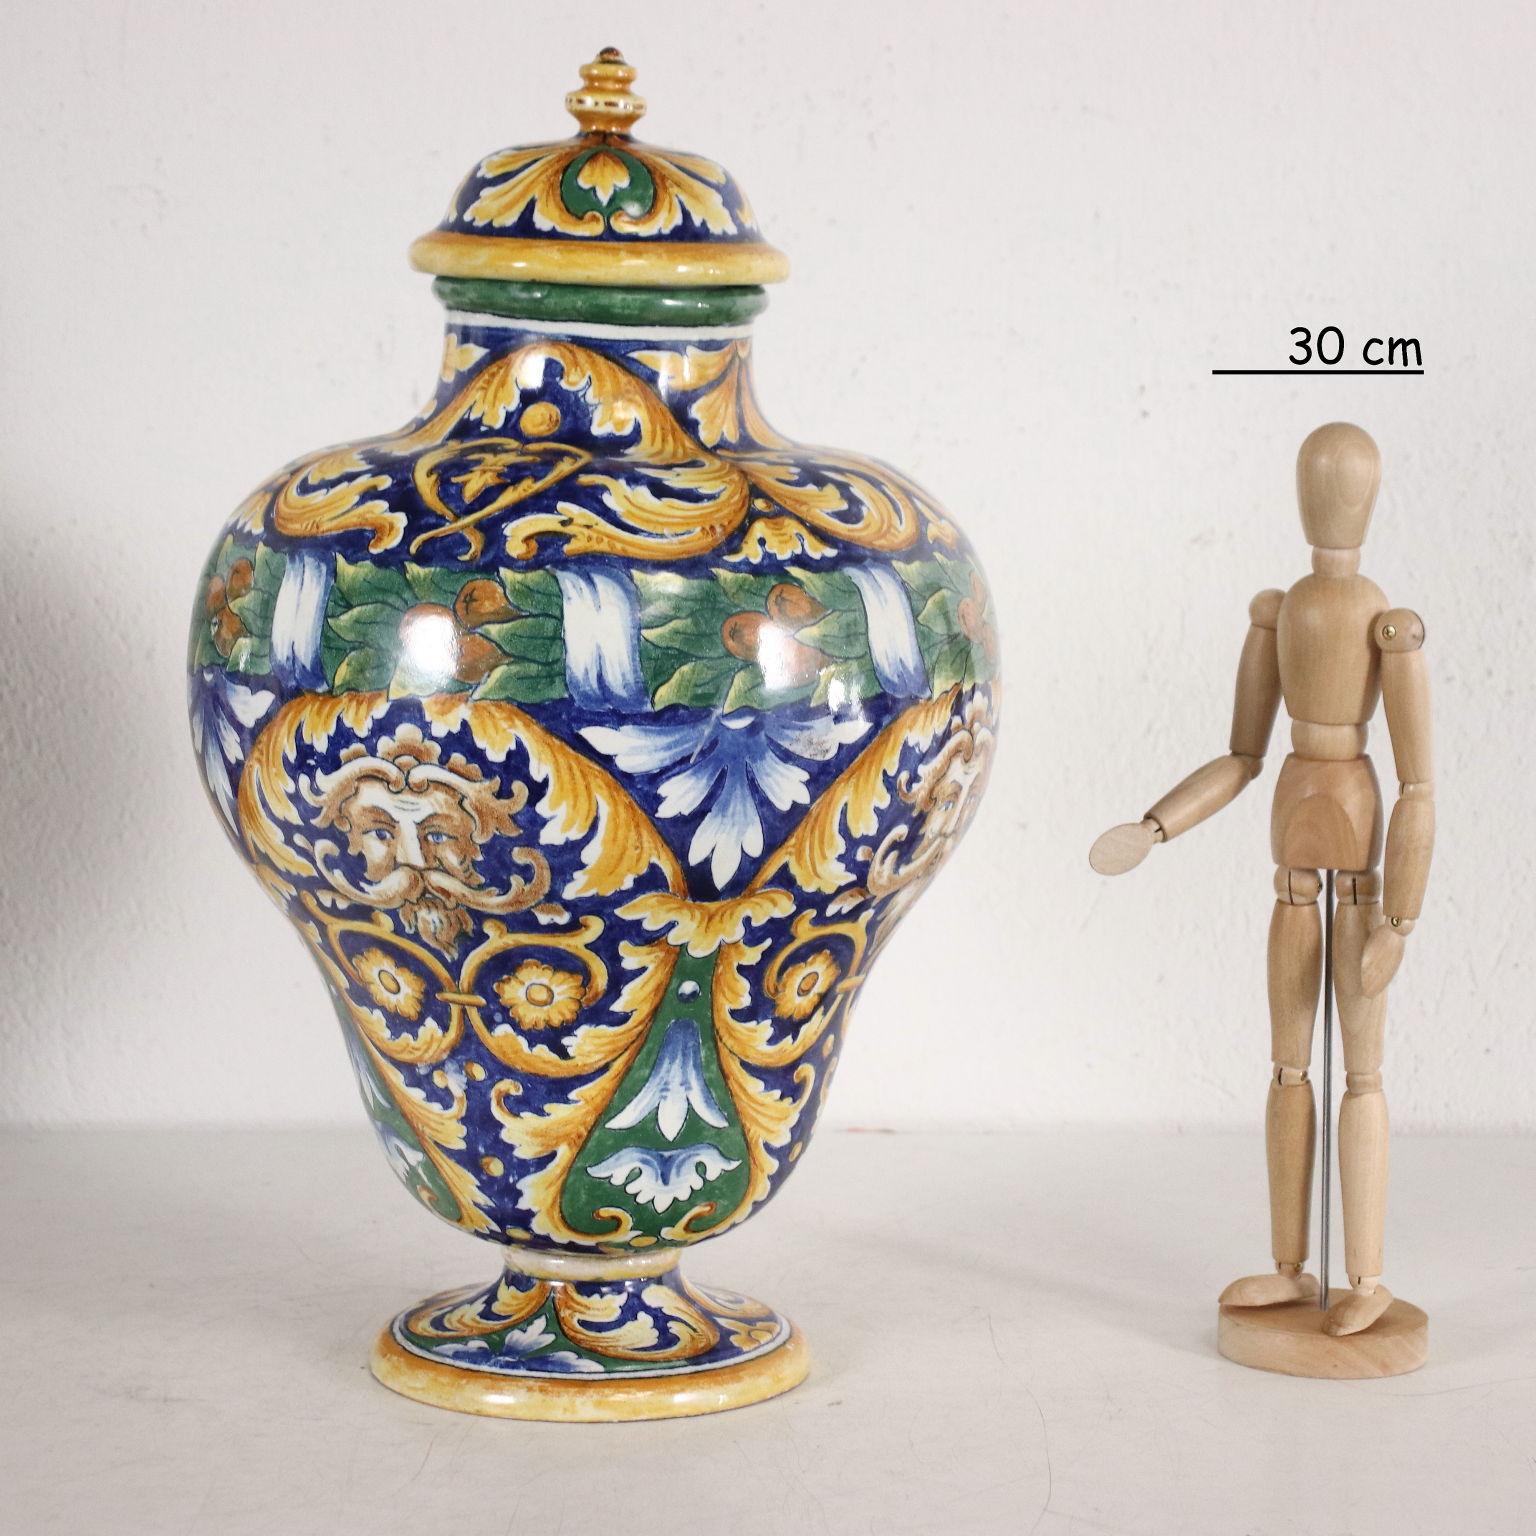 Pair of vases with polychrome majolica lids in Neo-Renaissance style with decorations with leafy scrolls, masks and plant motifs.